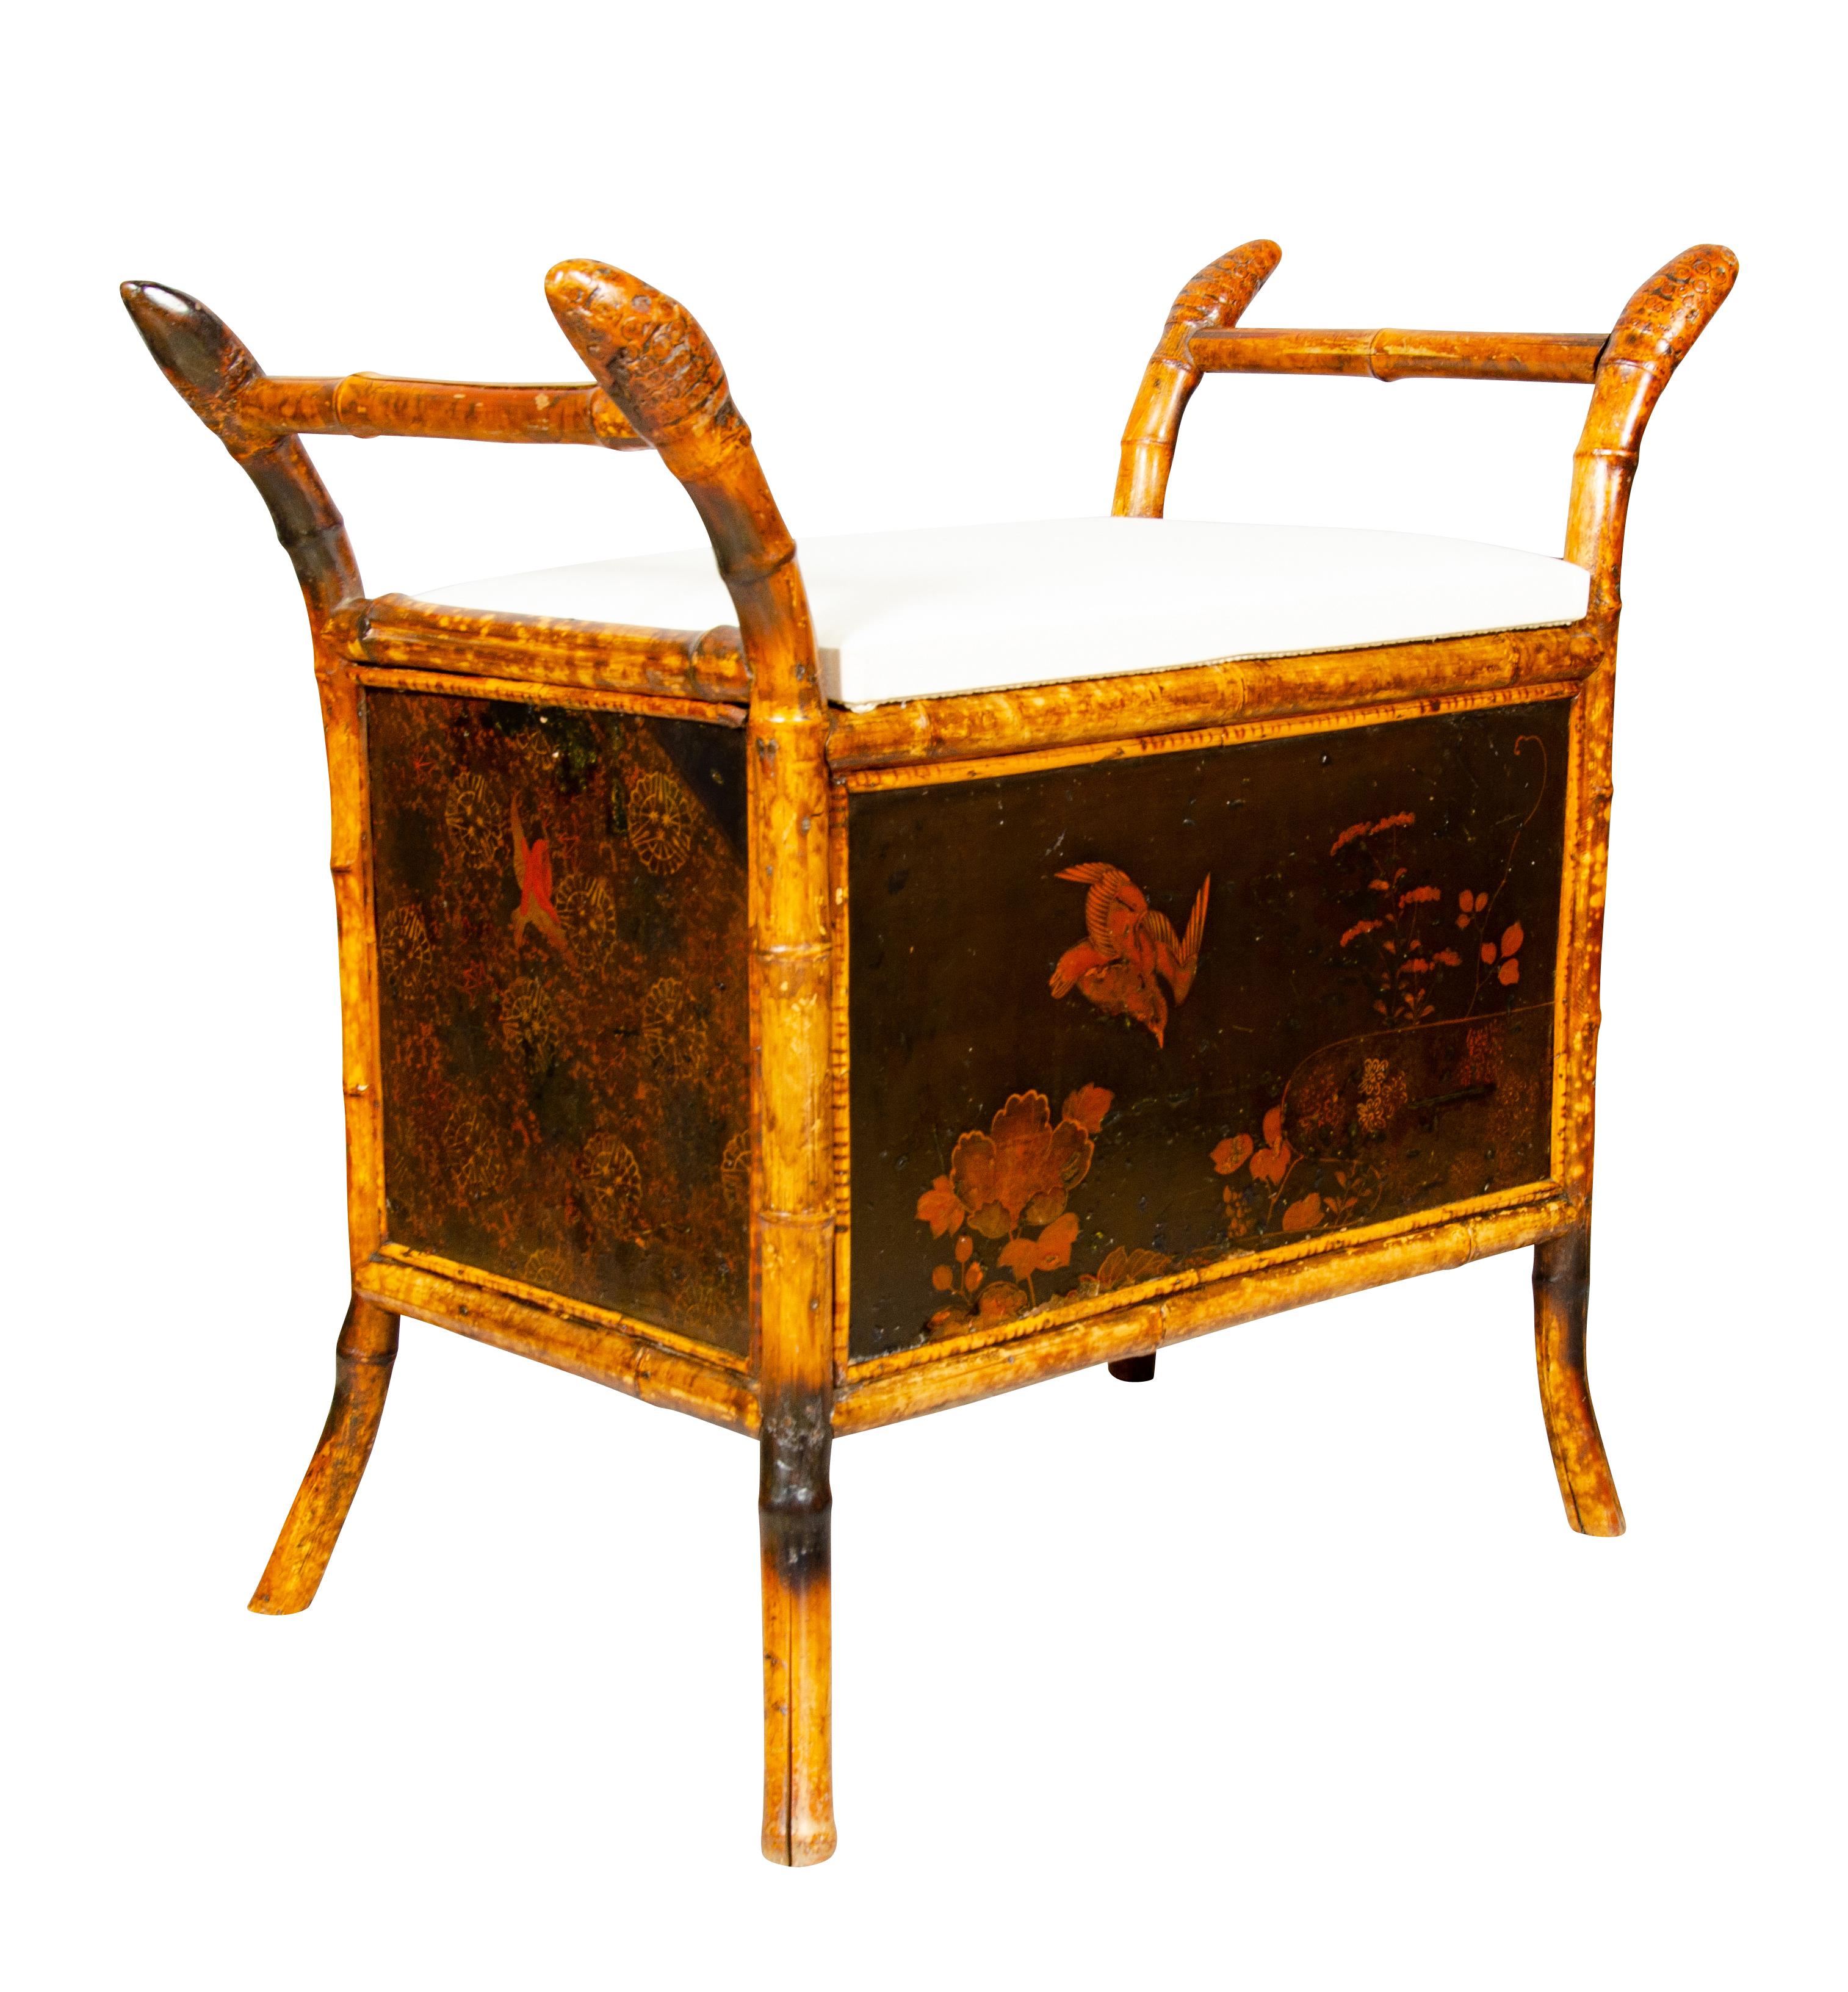 With rectangular new muslin upholstered hinged lid opening to an open slotted compartment. Scrolled arms. Chinoiserie decorated case section, bamboo legs. Provenance; Estate of interior designer William Hodgins, Boston Ma.